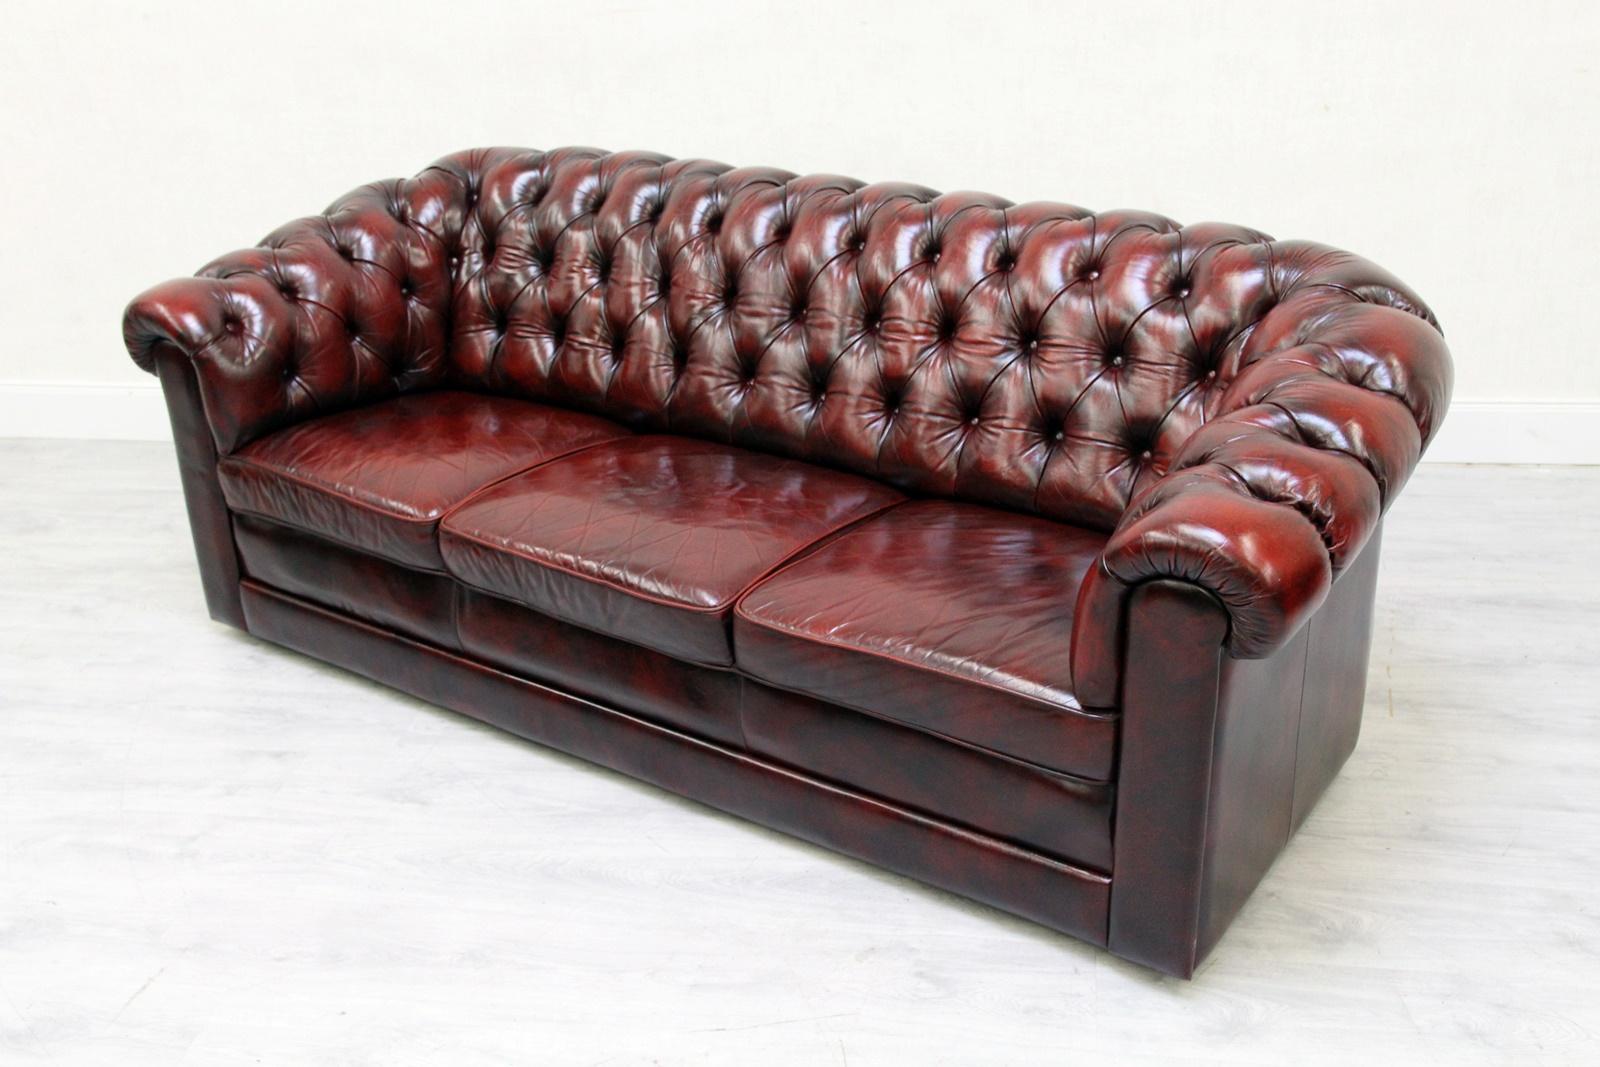 Late 20th Century Chesterfield Sofa Leather Antique Vintage Couch English Real Leather For Sale